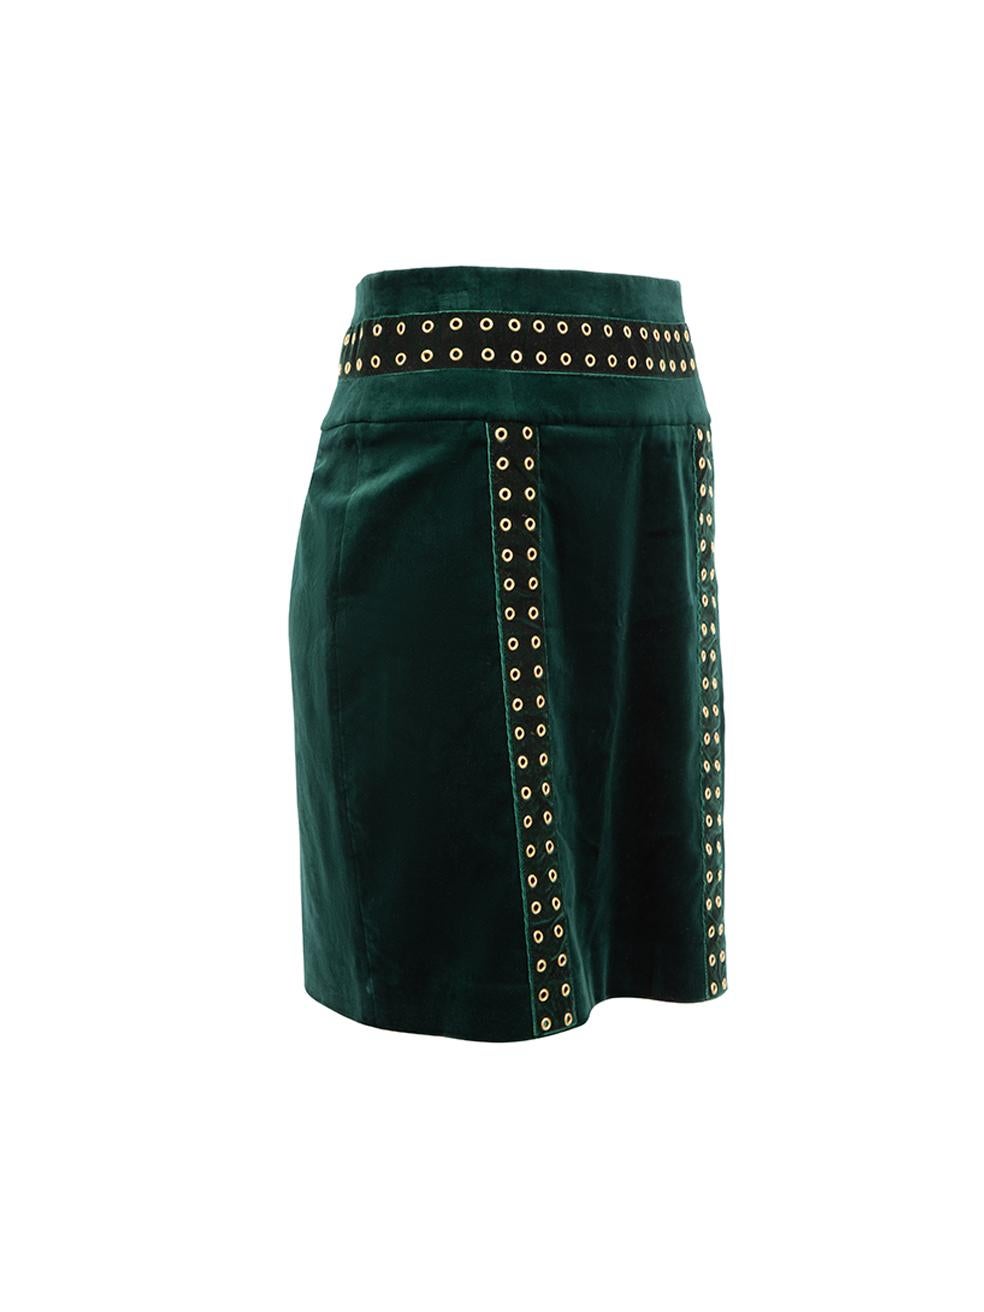 CONDITION is Very good. Minimal wear to skirt is evident. Minimal wear to the velvet exterior and there are some imprints to the material from the eyelets on this used Pierre Balmain designer resale item. 



Details


Green

Velvet

Mini